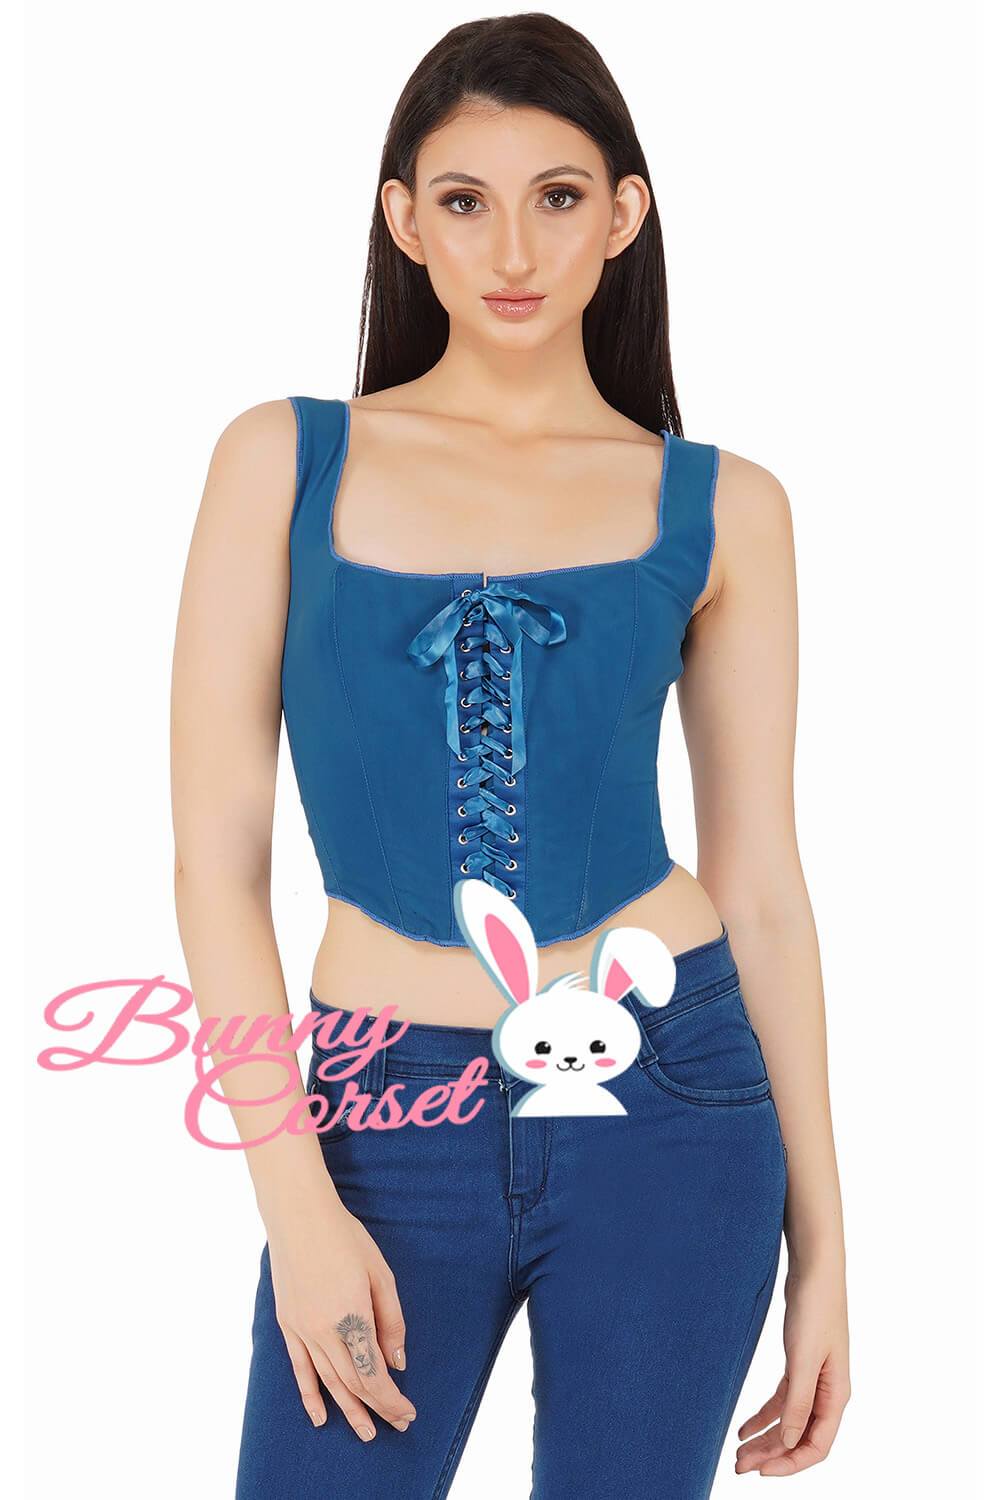 Get this corset top to complete your dress with skirt or pair it